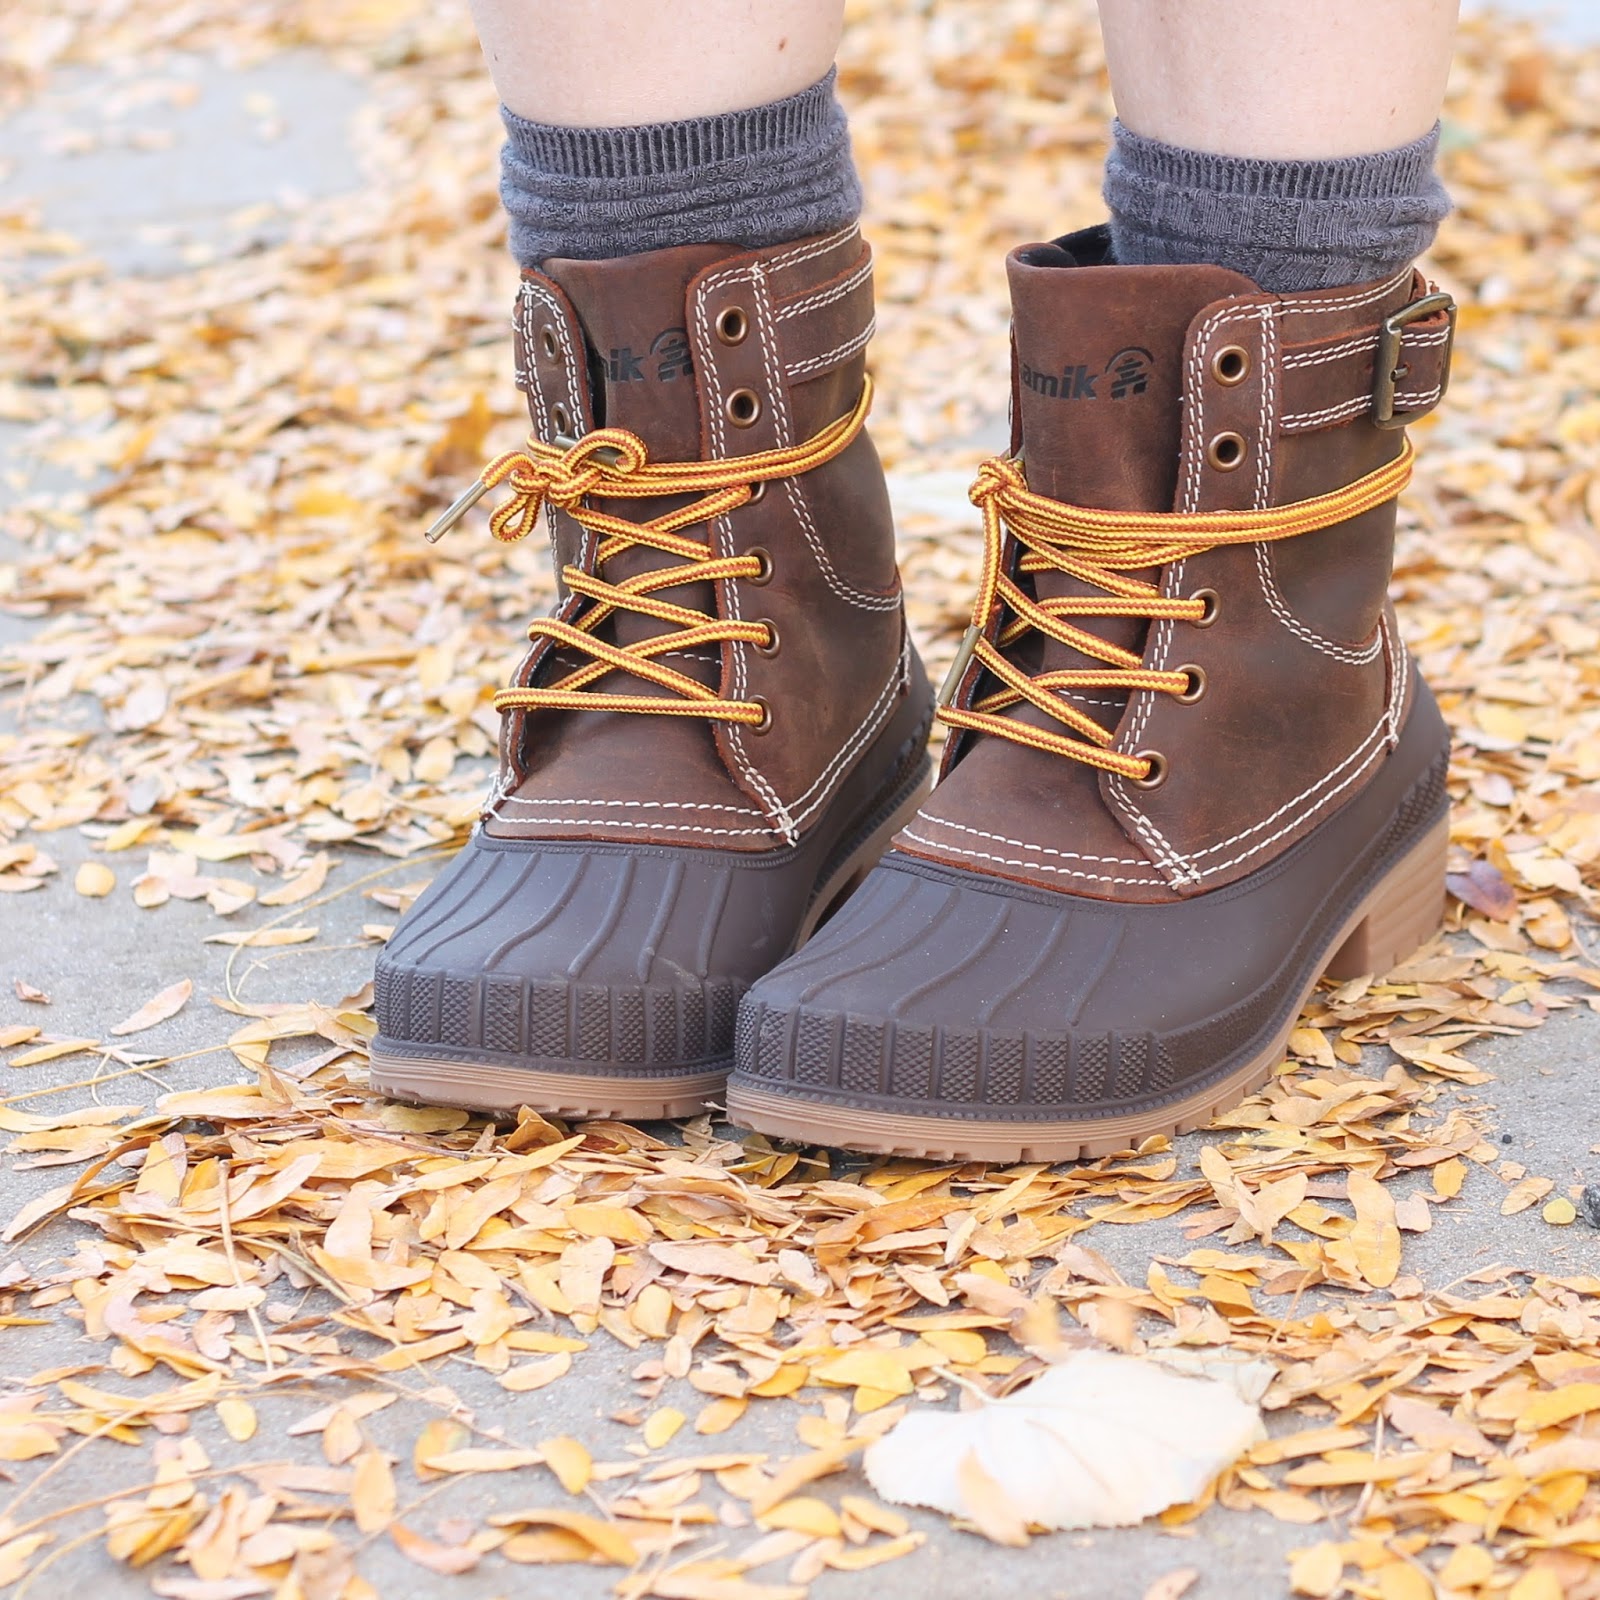 How To Wear Duck Boots | TfDiaries